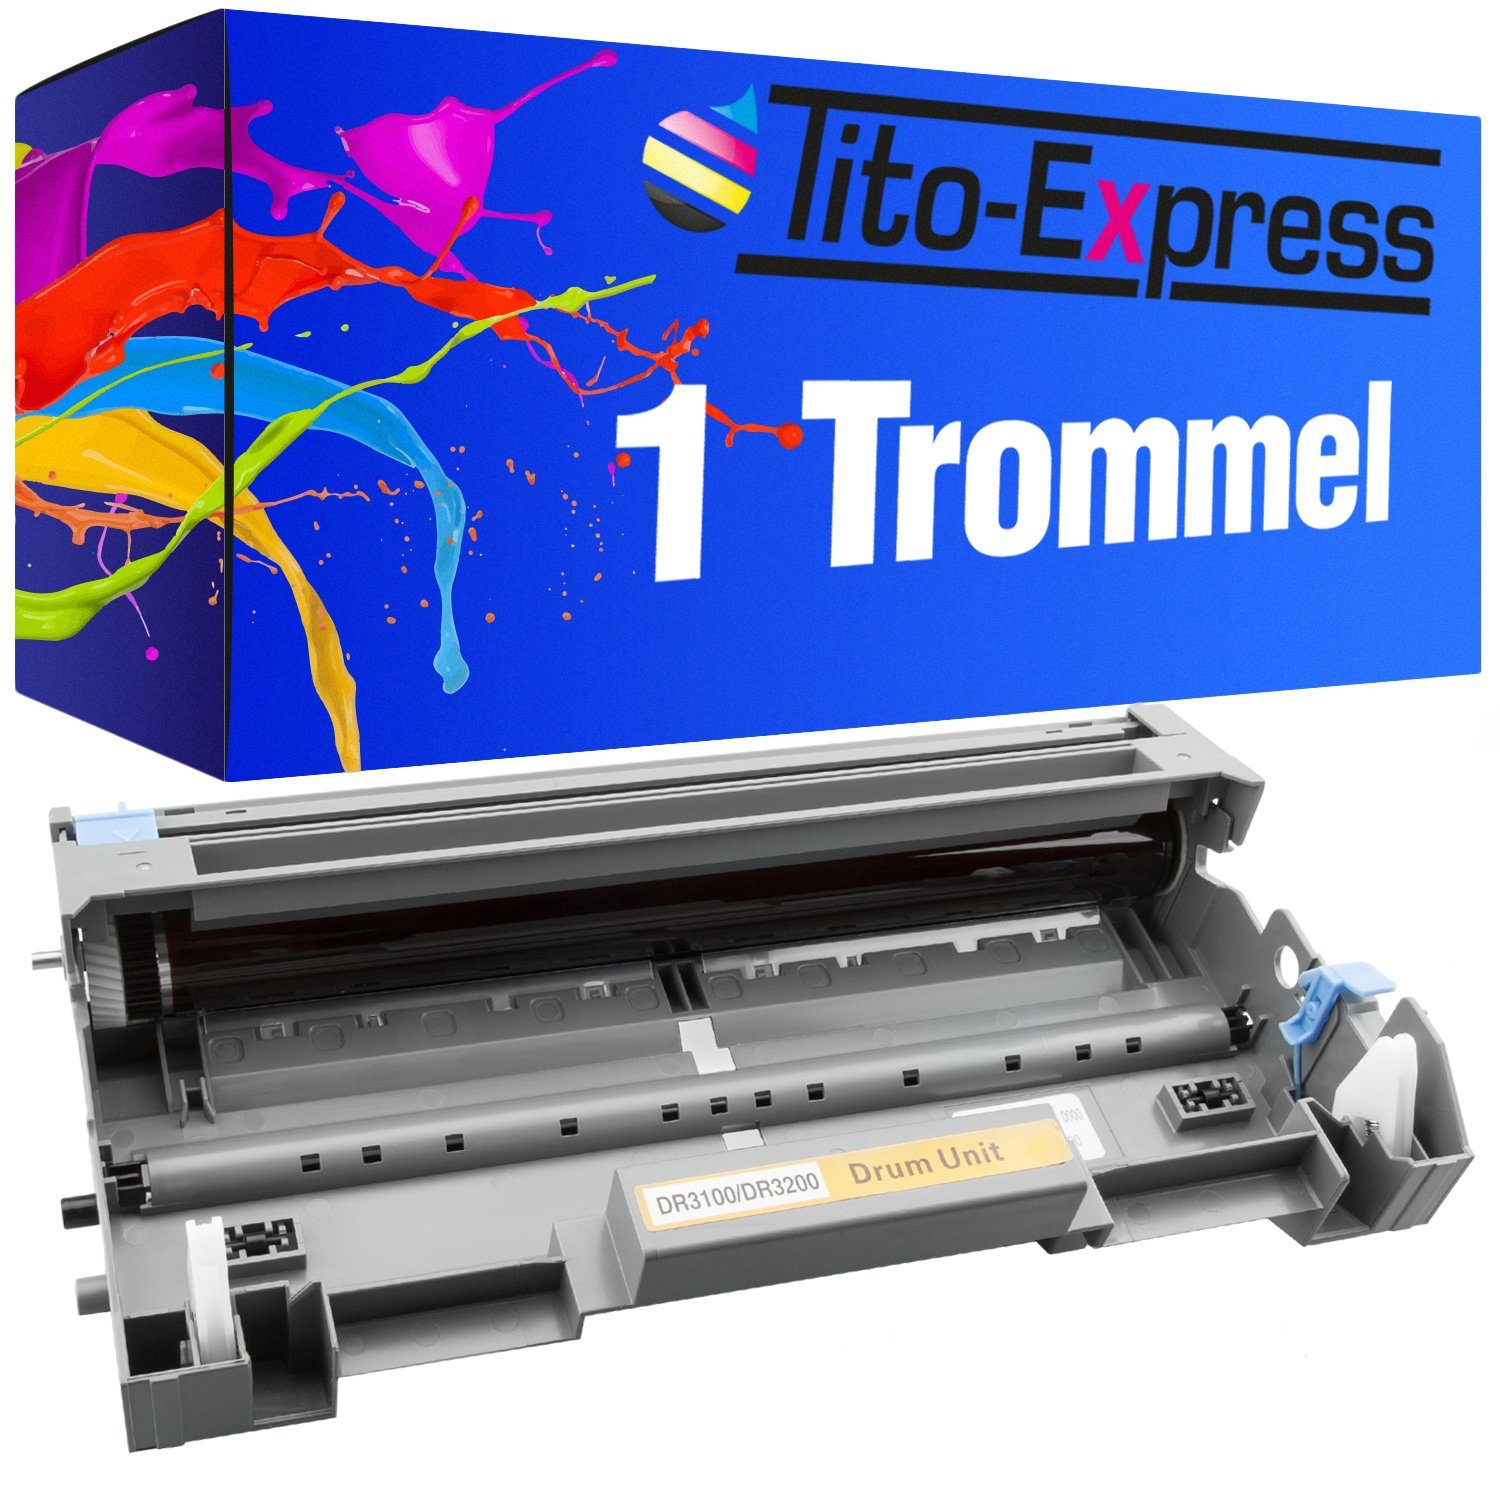 Tito-Express Tonerpatrone ersetzt Brother DR-3100 DR3100, (1x Trommel), für DCP-7030 DCP-7040 DCP-7045N HL-2140 HL-2150N HL-2170N HL-2170W